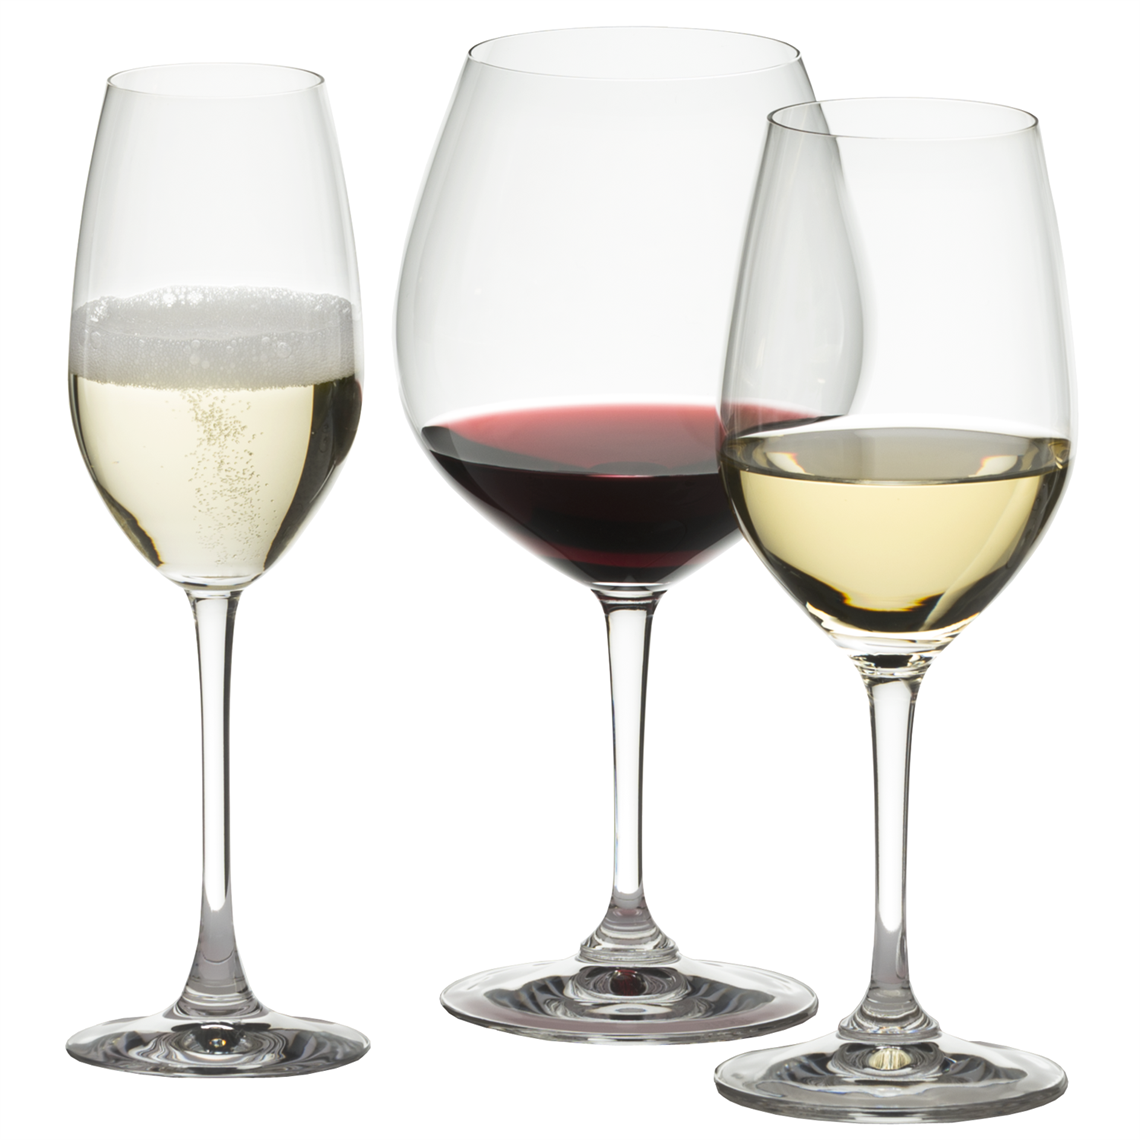 View more schott zwiesel tritan crystal glass from our Restaurant & Trade Glasses range